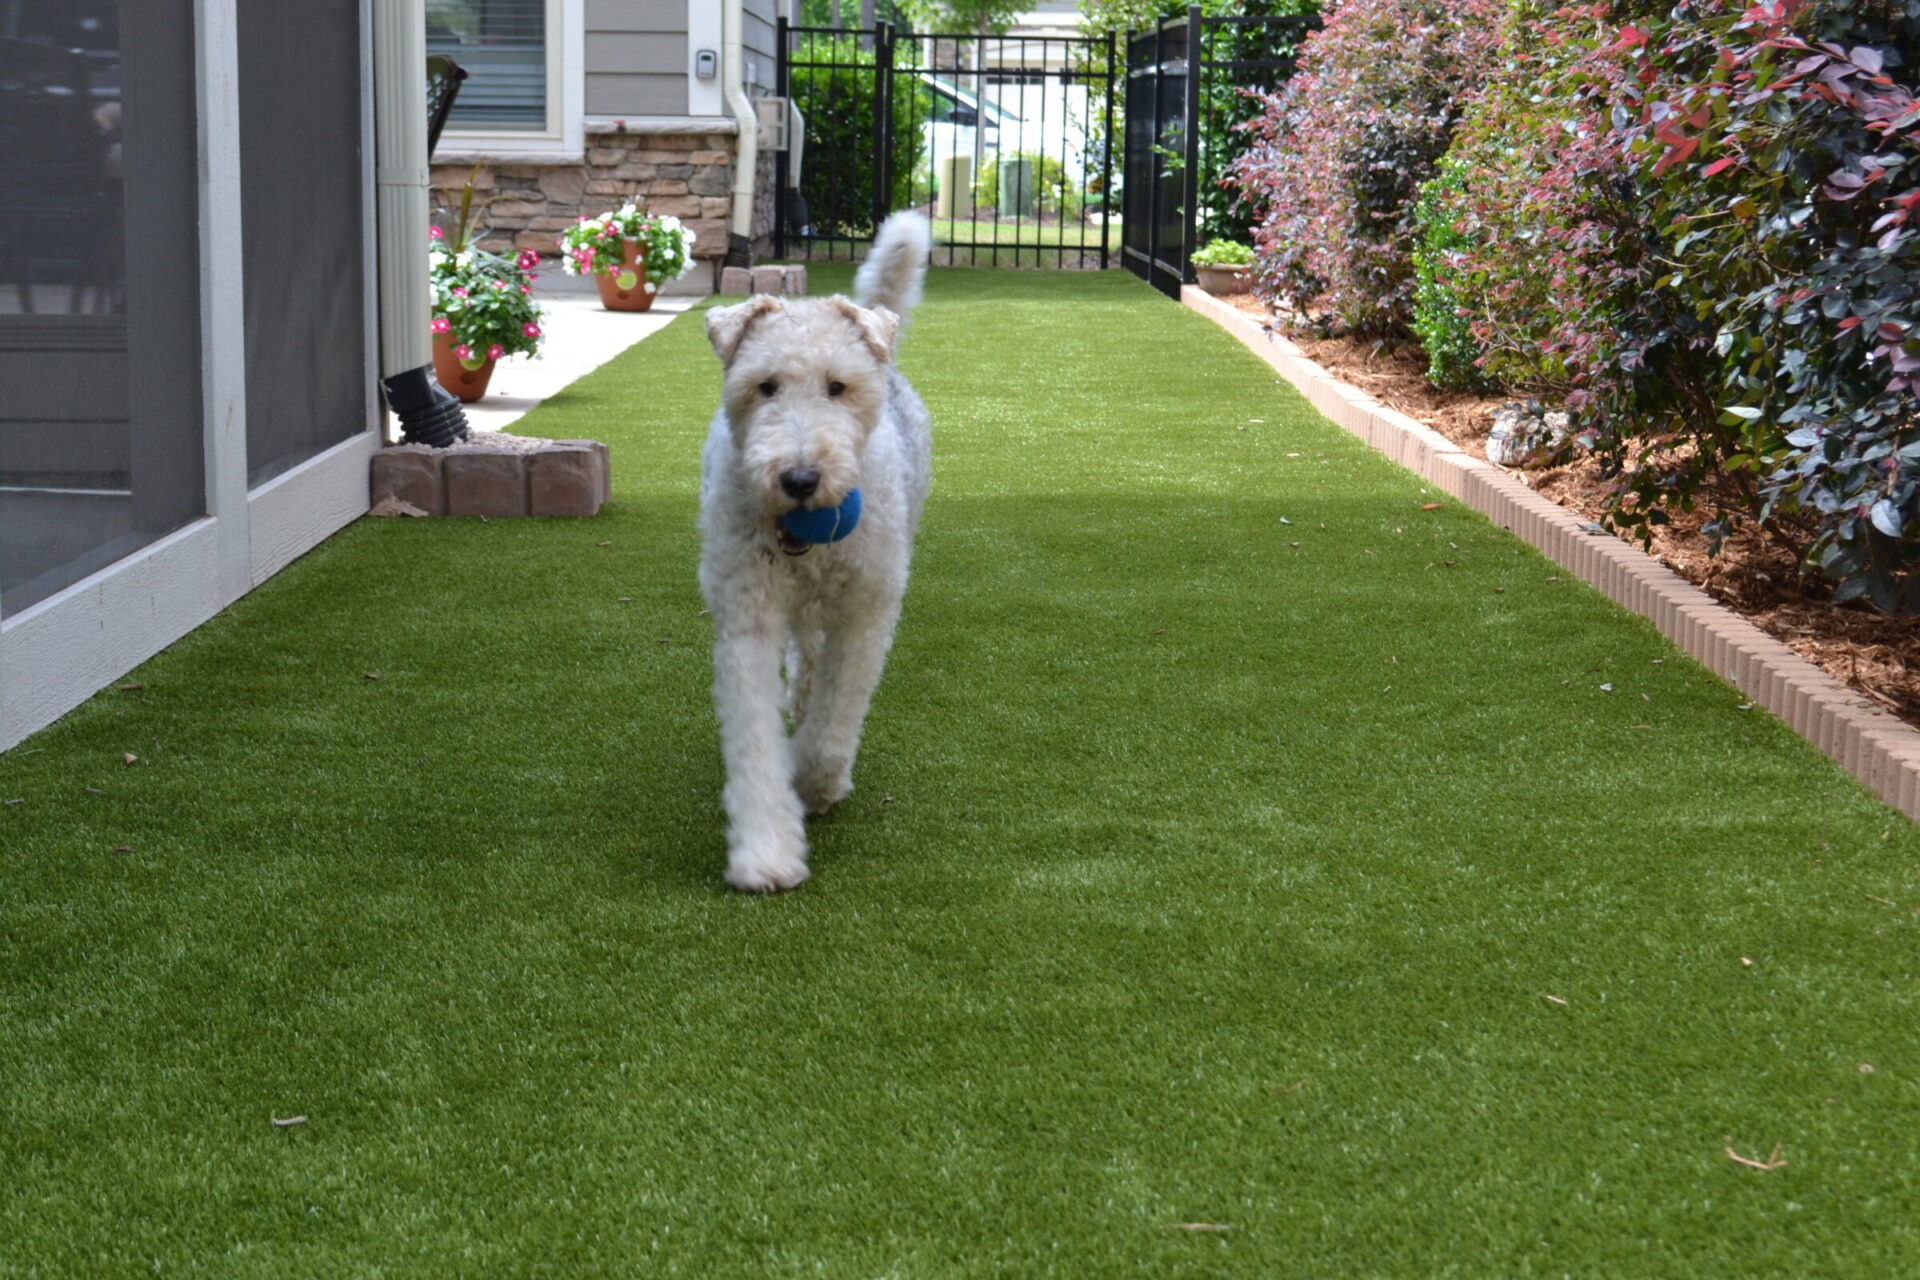 A playful dog with a blue ball in its mouth is running on the green grass towards the camera, with a house and plants in the background.